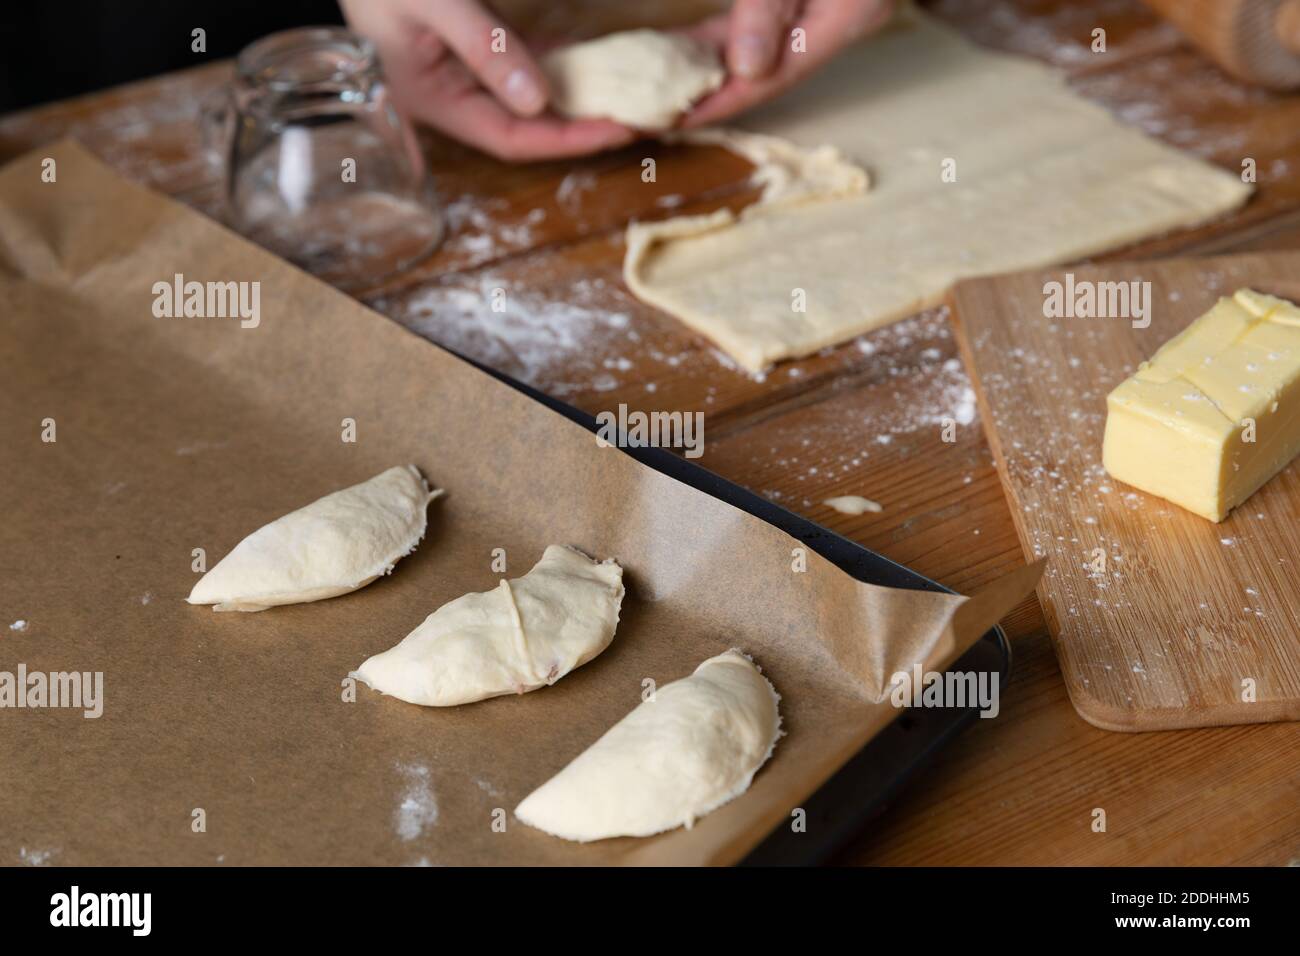 Women preparing homemade food pie, pizza in a cozzy kitchen. Hobbies and family life concept. Stock Photo